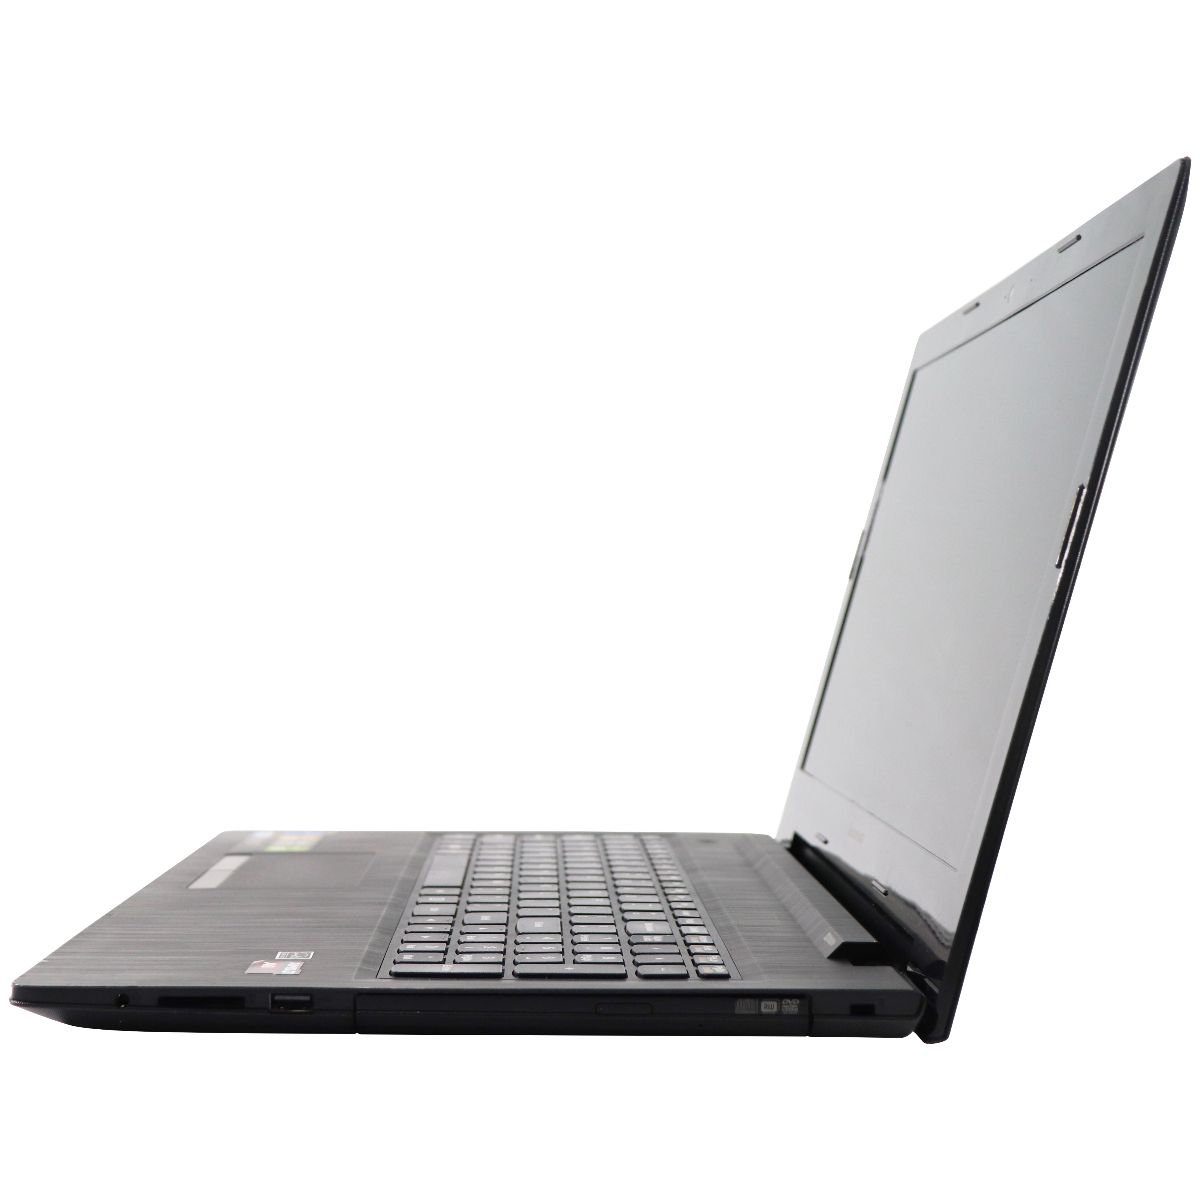 Lenovo G50-45 15.6-in Laptop AMD A8-Series A8-6410 (2GhZ) 6GB 500GB HDD - Black Laptops - PC Laptops & Netbooks Lenovo    - Simple Cell Bulk Wholesale Pricing - USA Seller